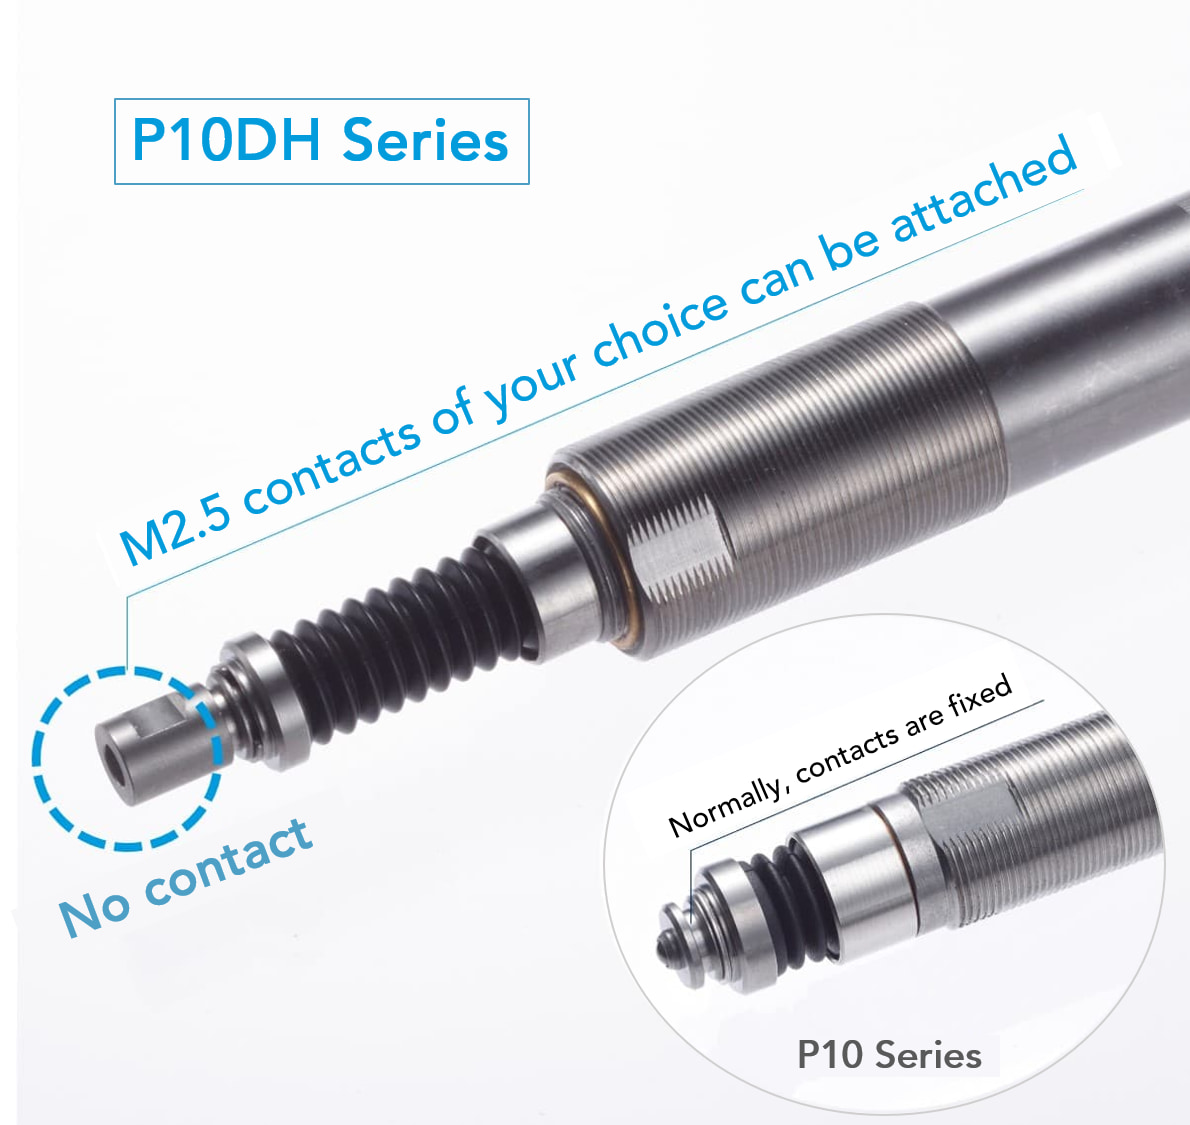 The P10DH series can retrofit any shape of contact to the body.